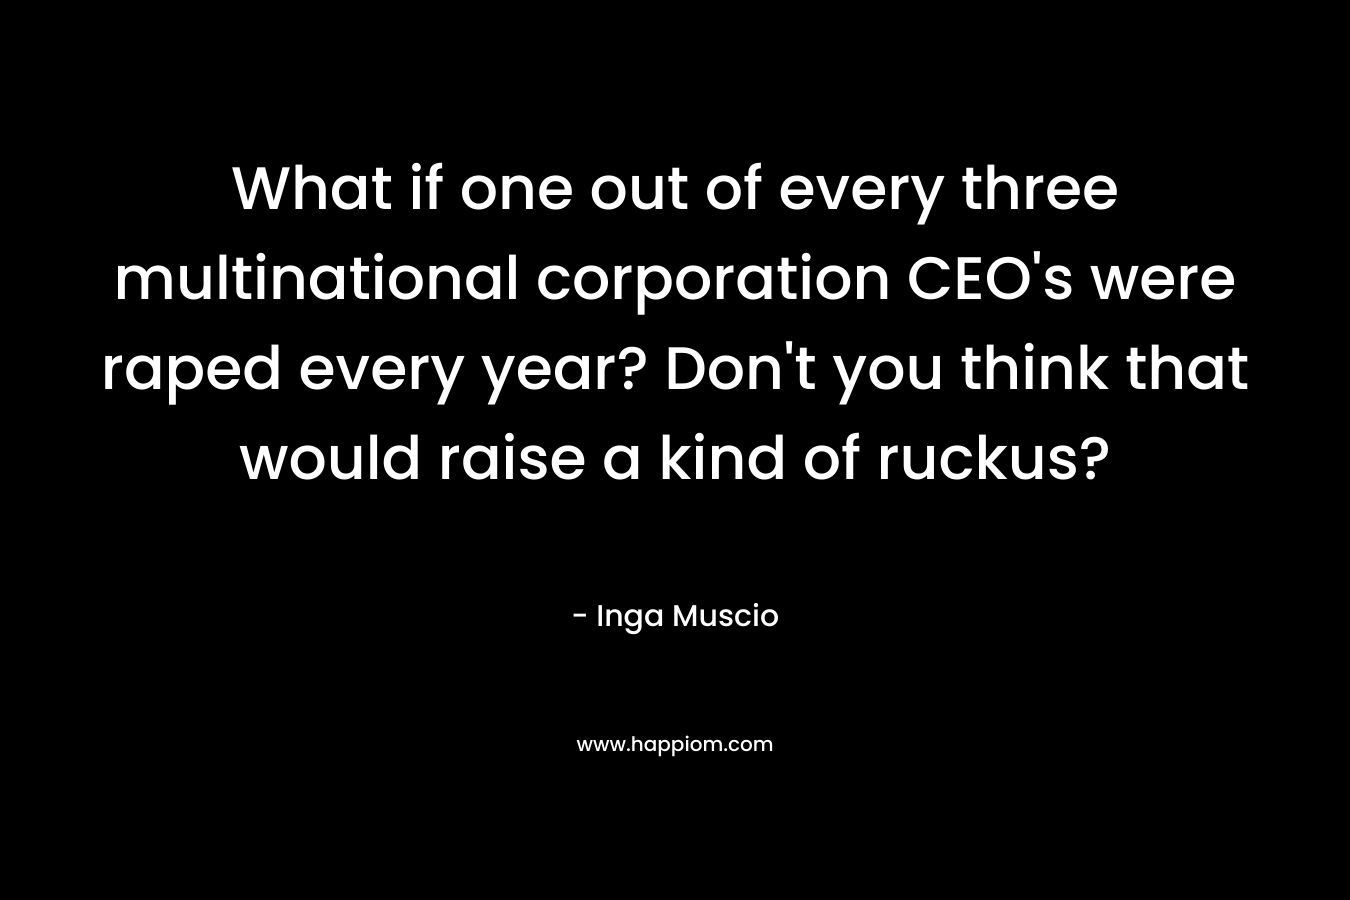 What if one out of every three multinational corporation CEO's were raped every year? Don't you think that would raise a kind of ruckus?